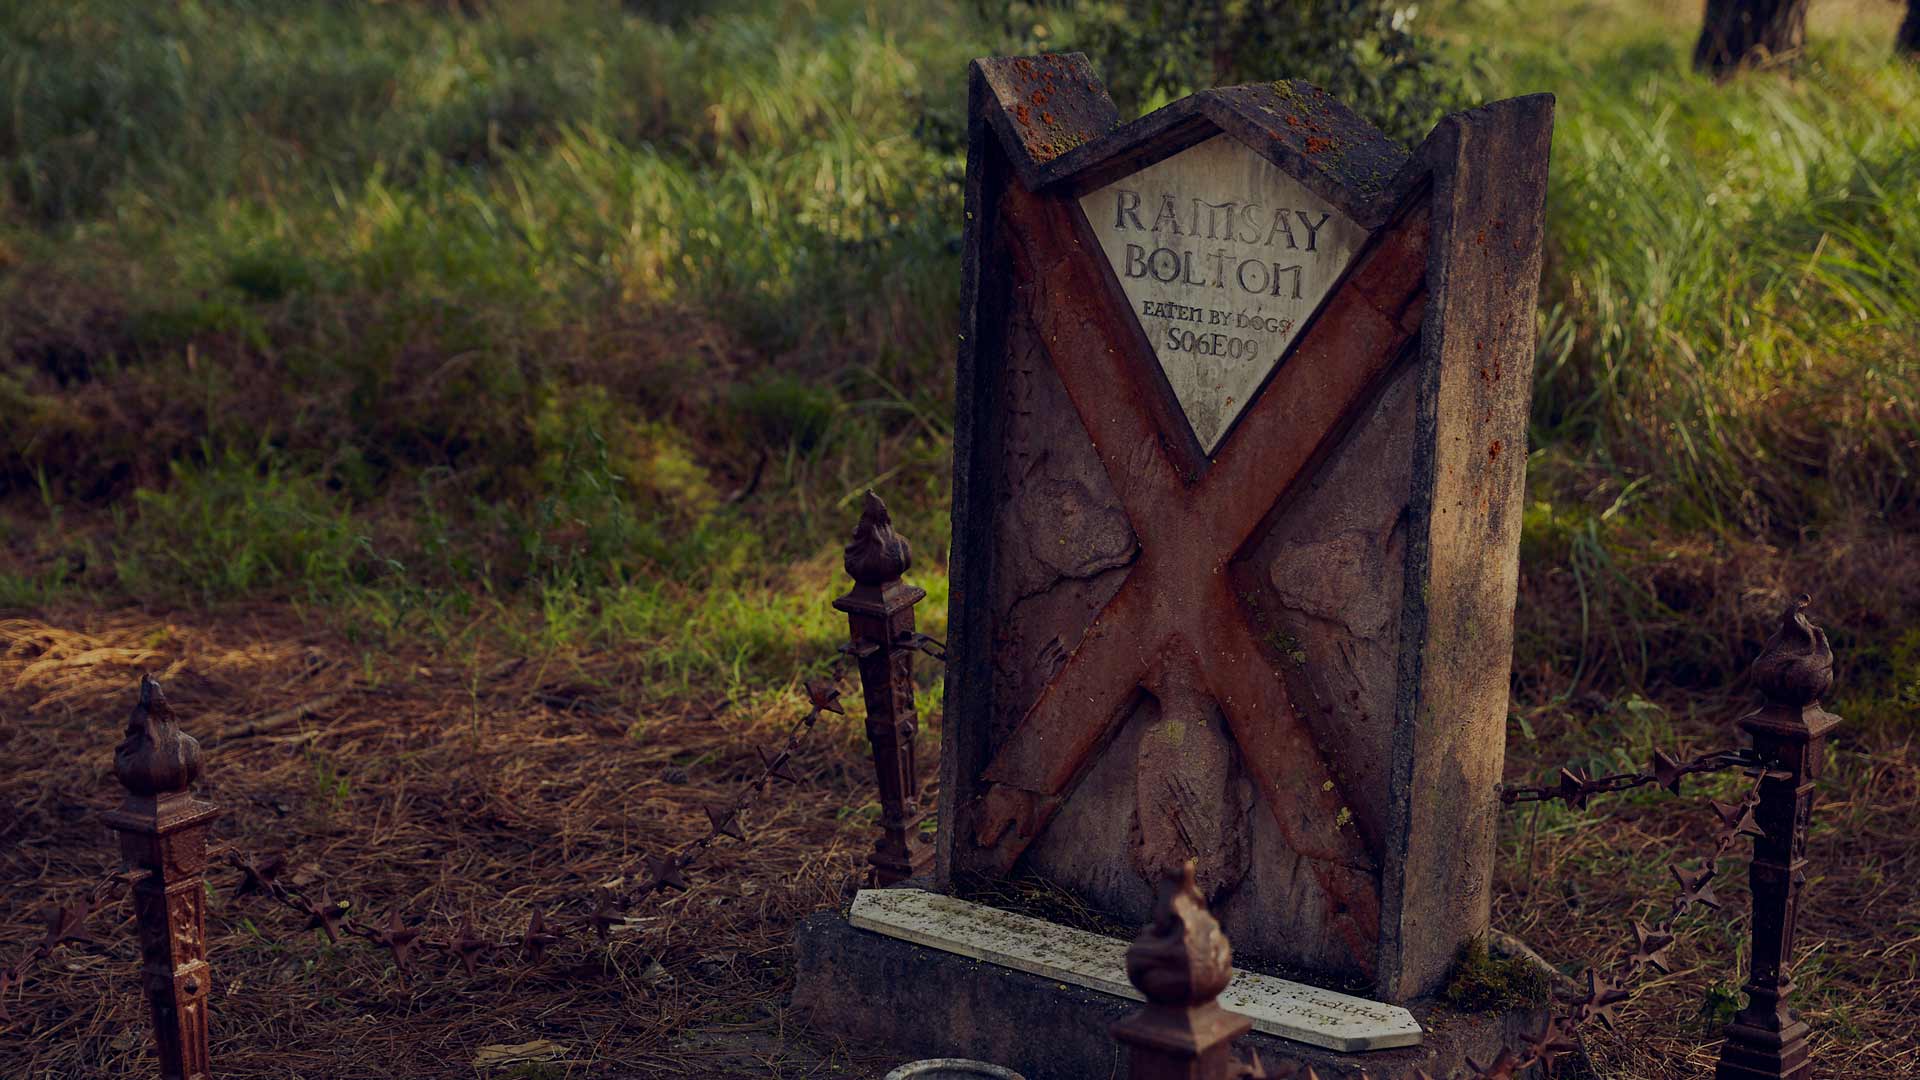 A Look Inside Sydney's Immersive and Ominous 'Game of Thrones' Graveyard